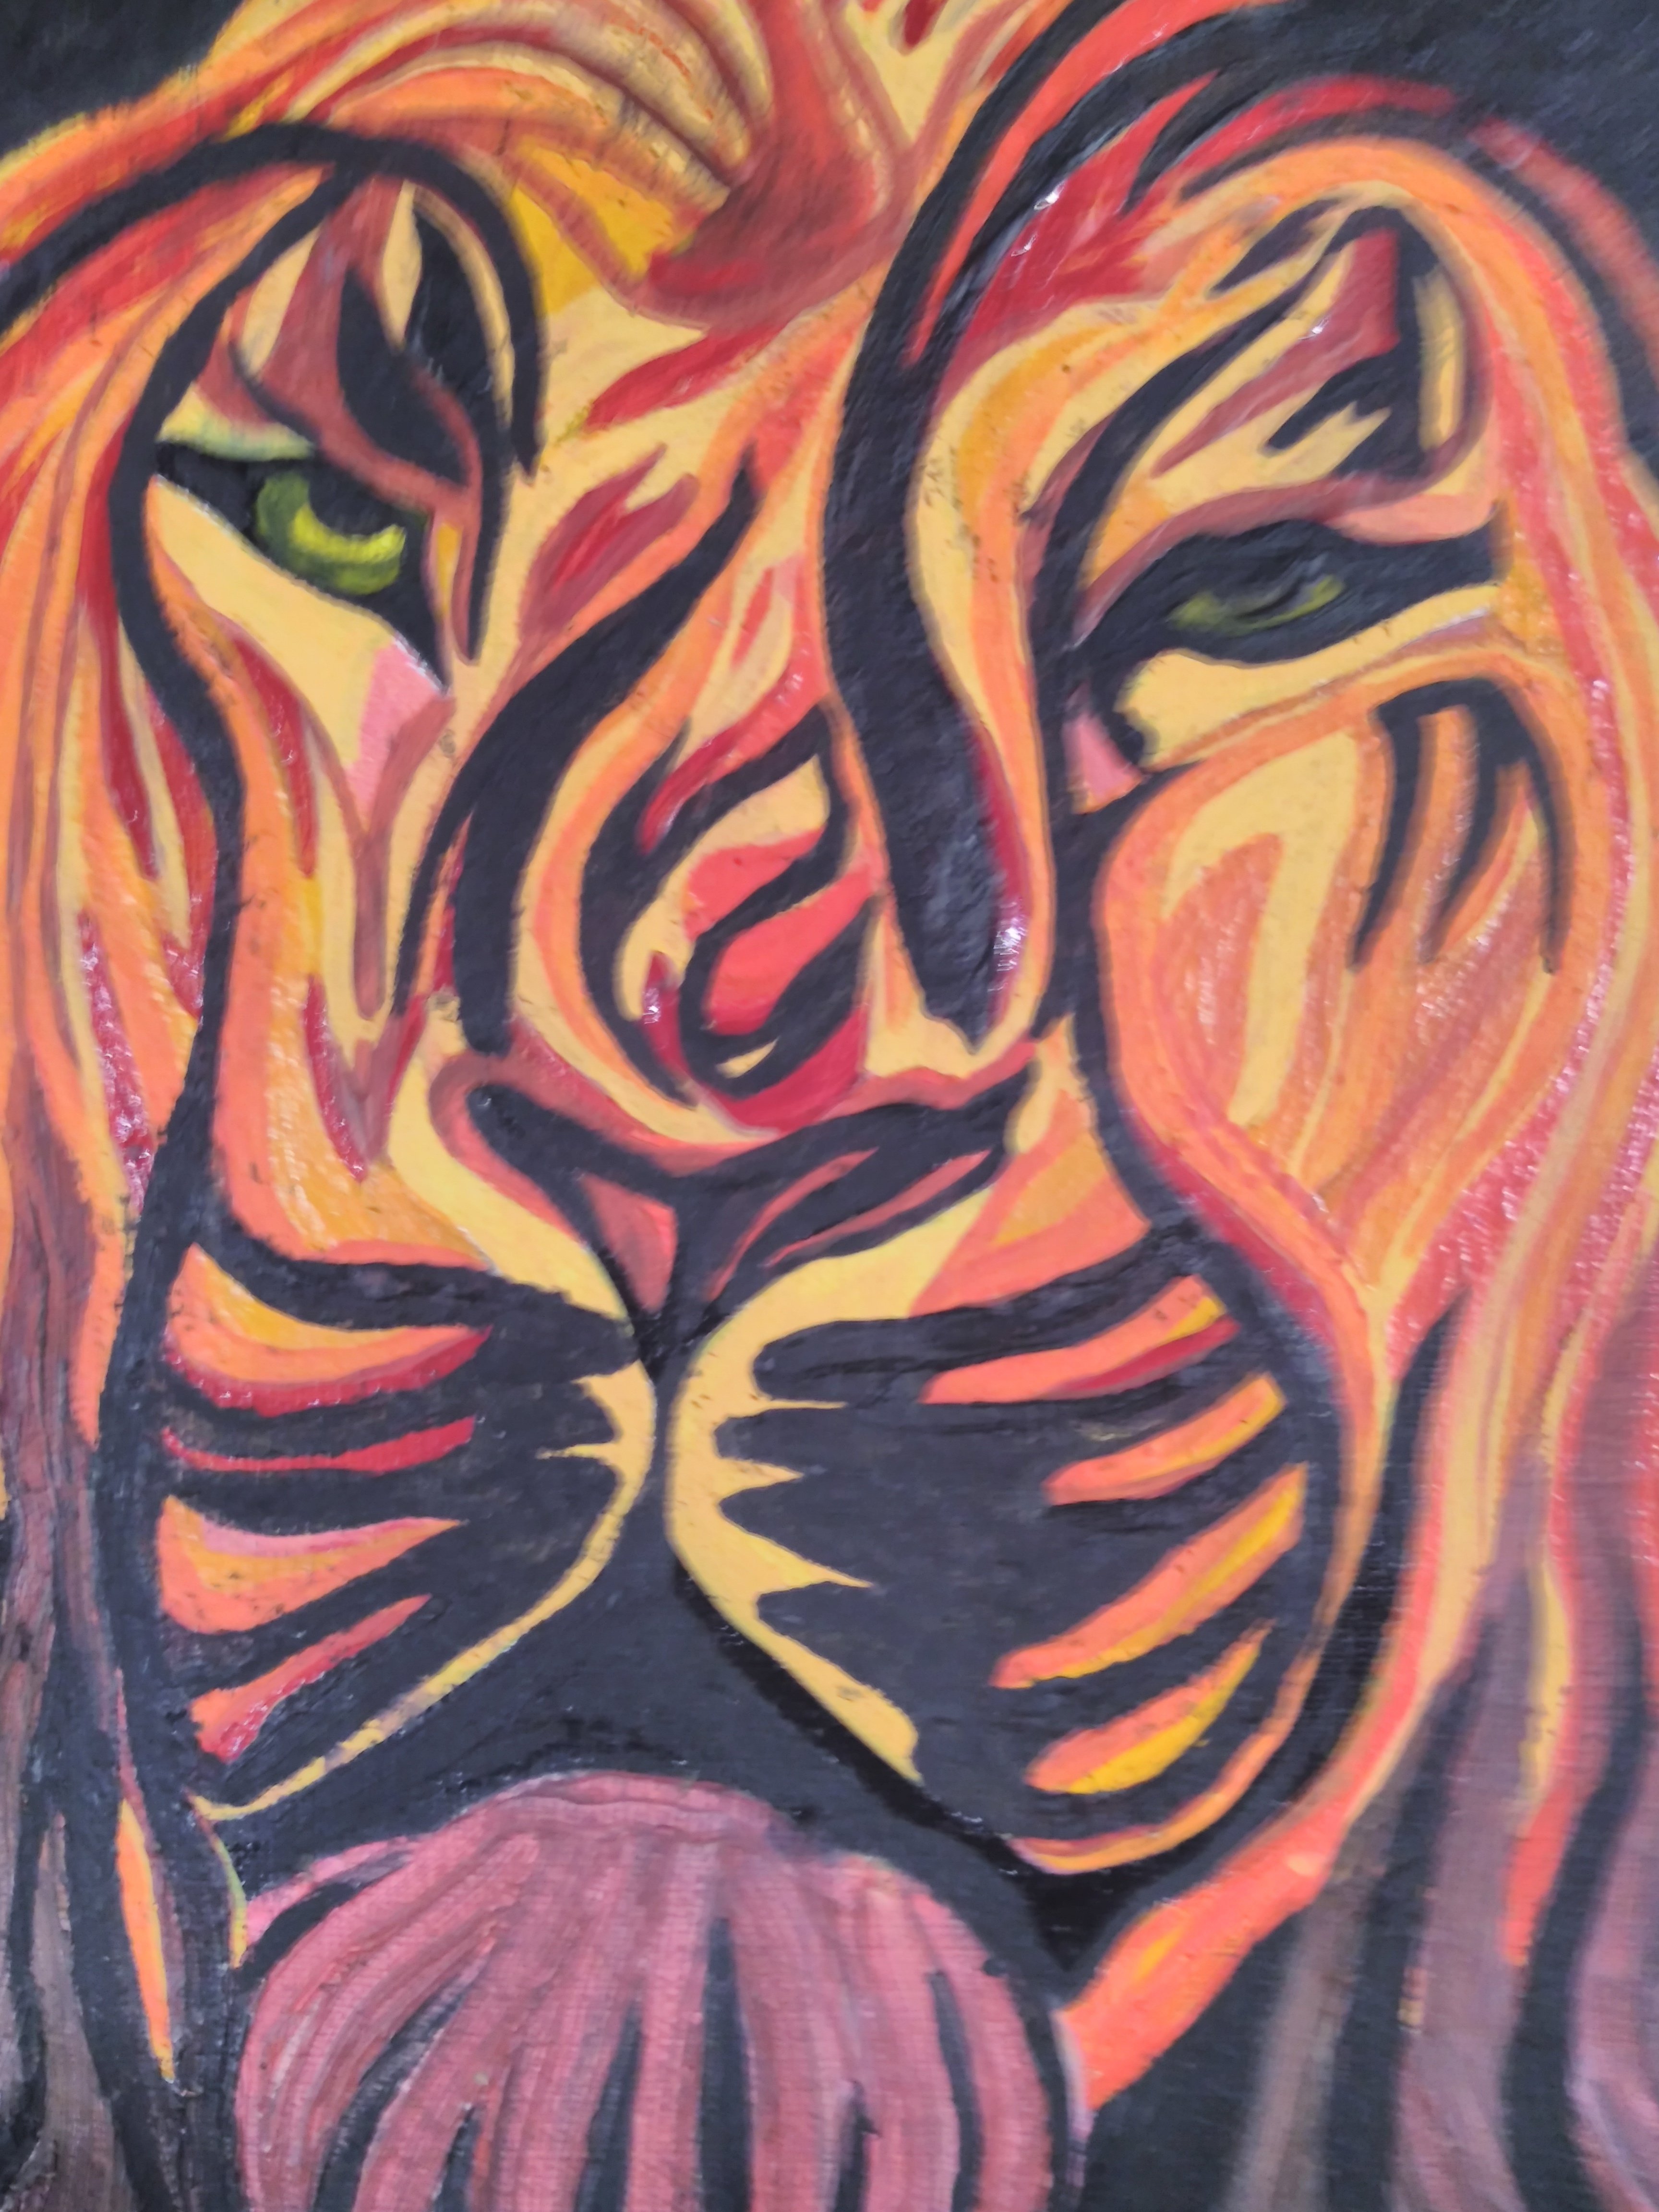 Bryan Davis; 30 Shades Of Lion, 2019, Original Painting Other, 11 x 14 inches. Artwork description: 241 I started with the idea of drawing a lion face.  It was so much fun painting it that I did not want to stop and kept adding more colors to the point that I had this lion with so many shades.  I had to paint it again ...